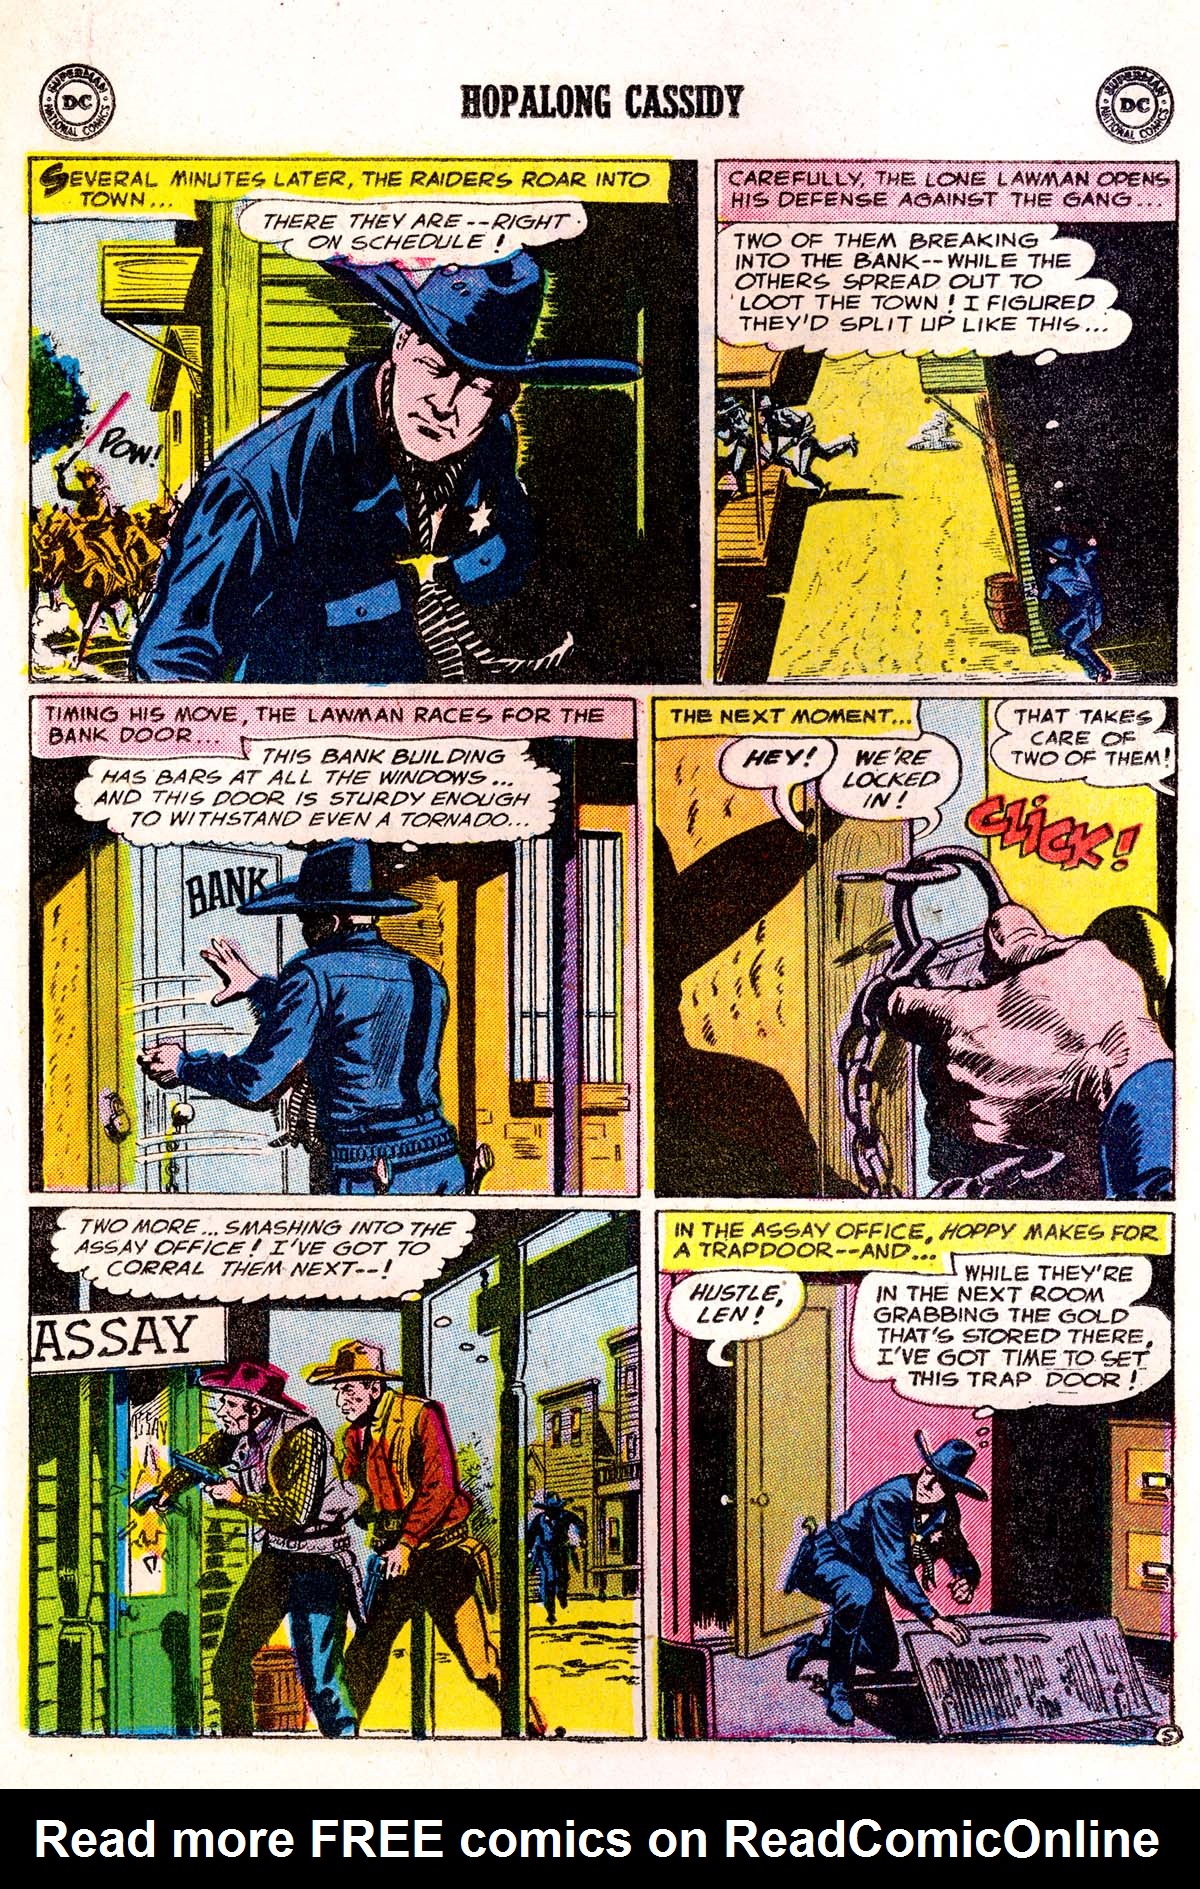 Read online Hopalong Cassidy comic -  Issue #119 - 18